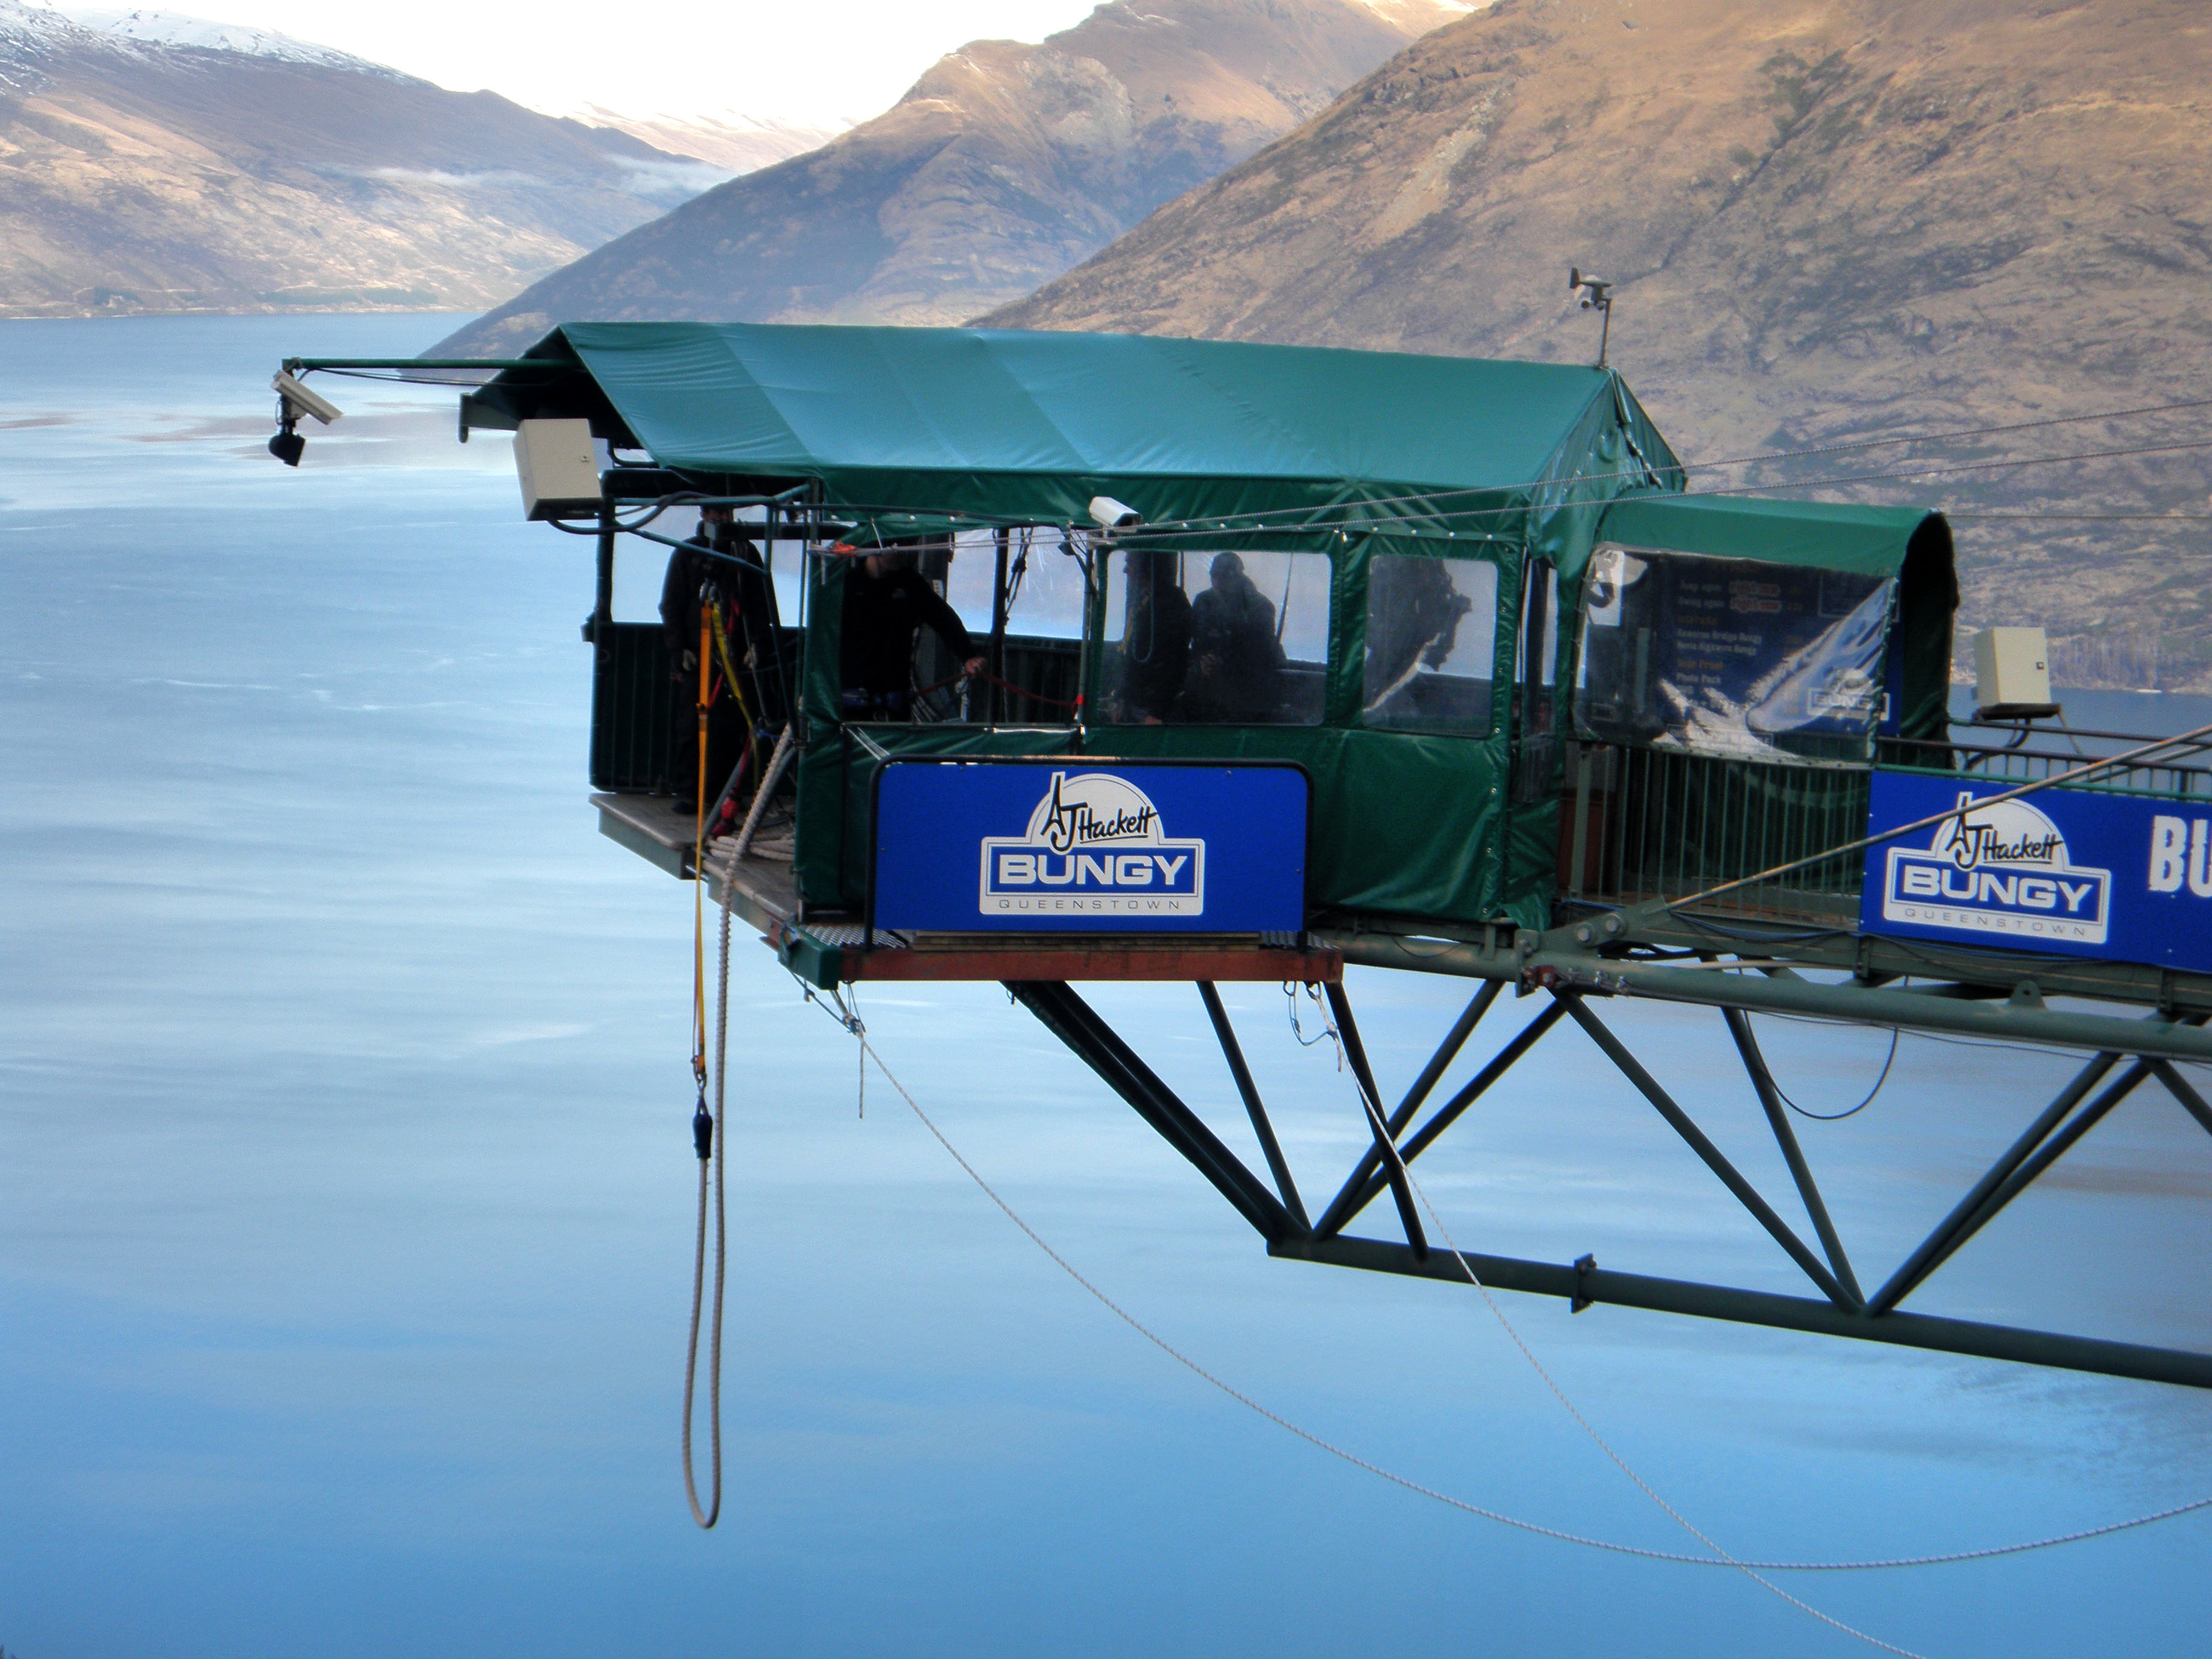 Asisbiz Bungy jumping sky swing Queenstown South Island New Zealand 11